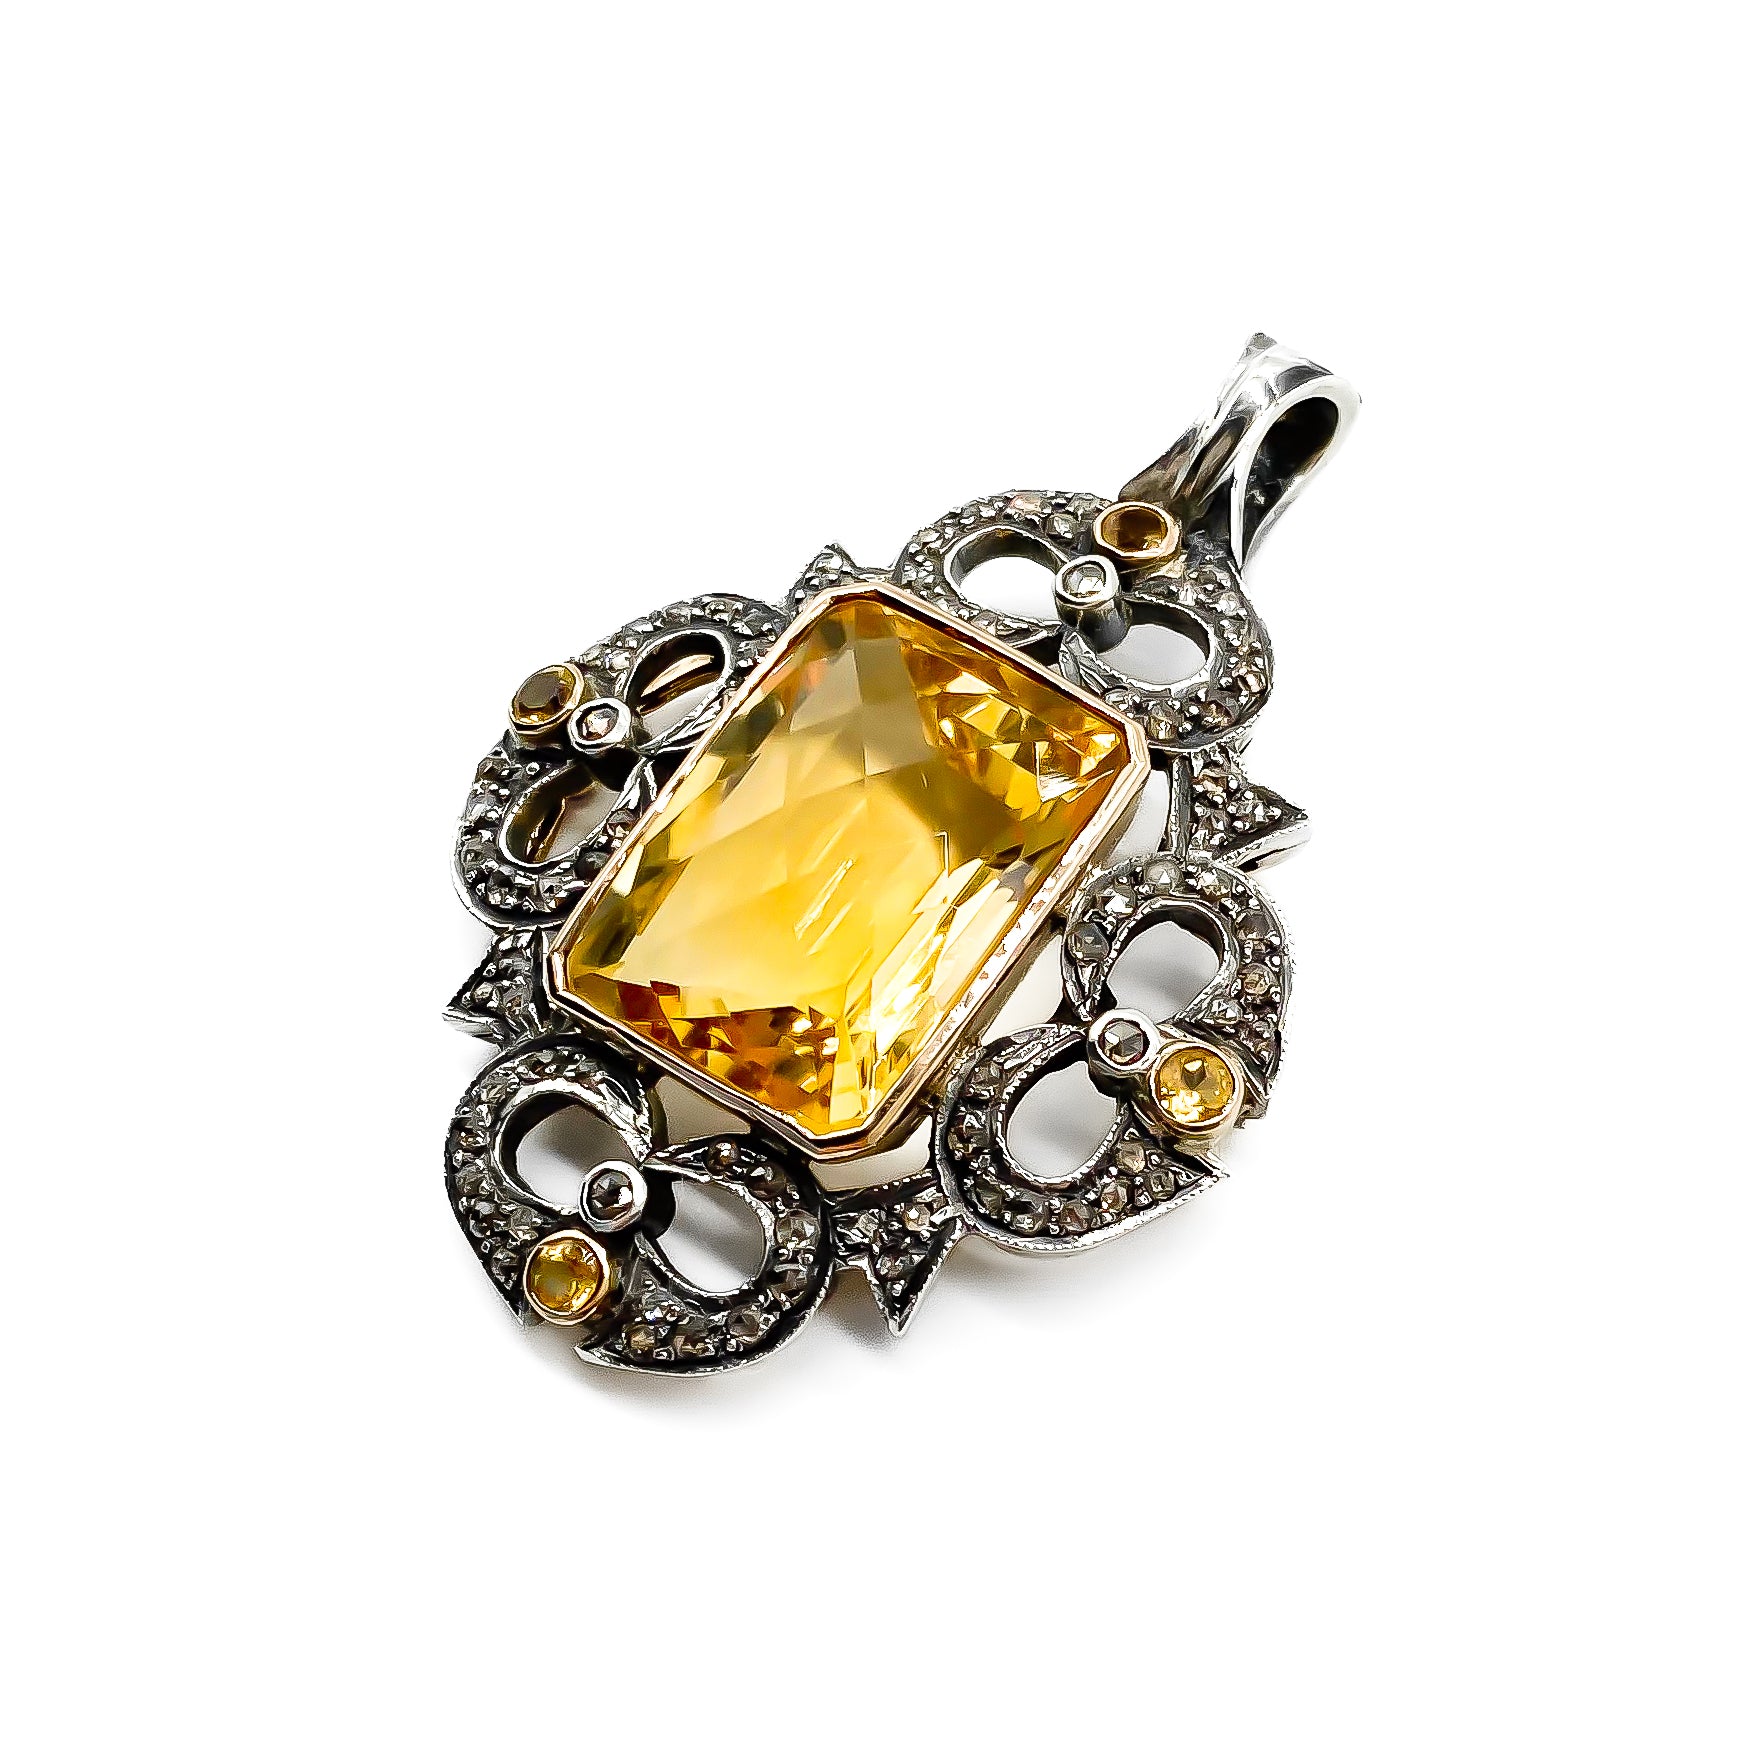 Gorgeous rose gold and silver pendant set with a beautifully faceted rectangular citrine and four smaller round citrines in a pavé diamond setting.